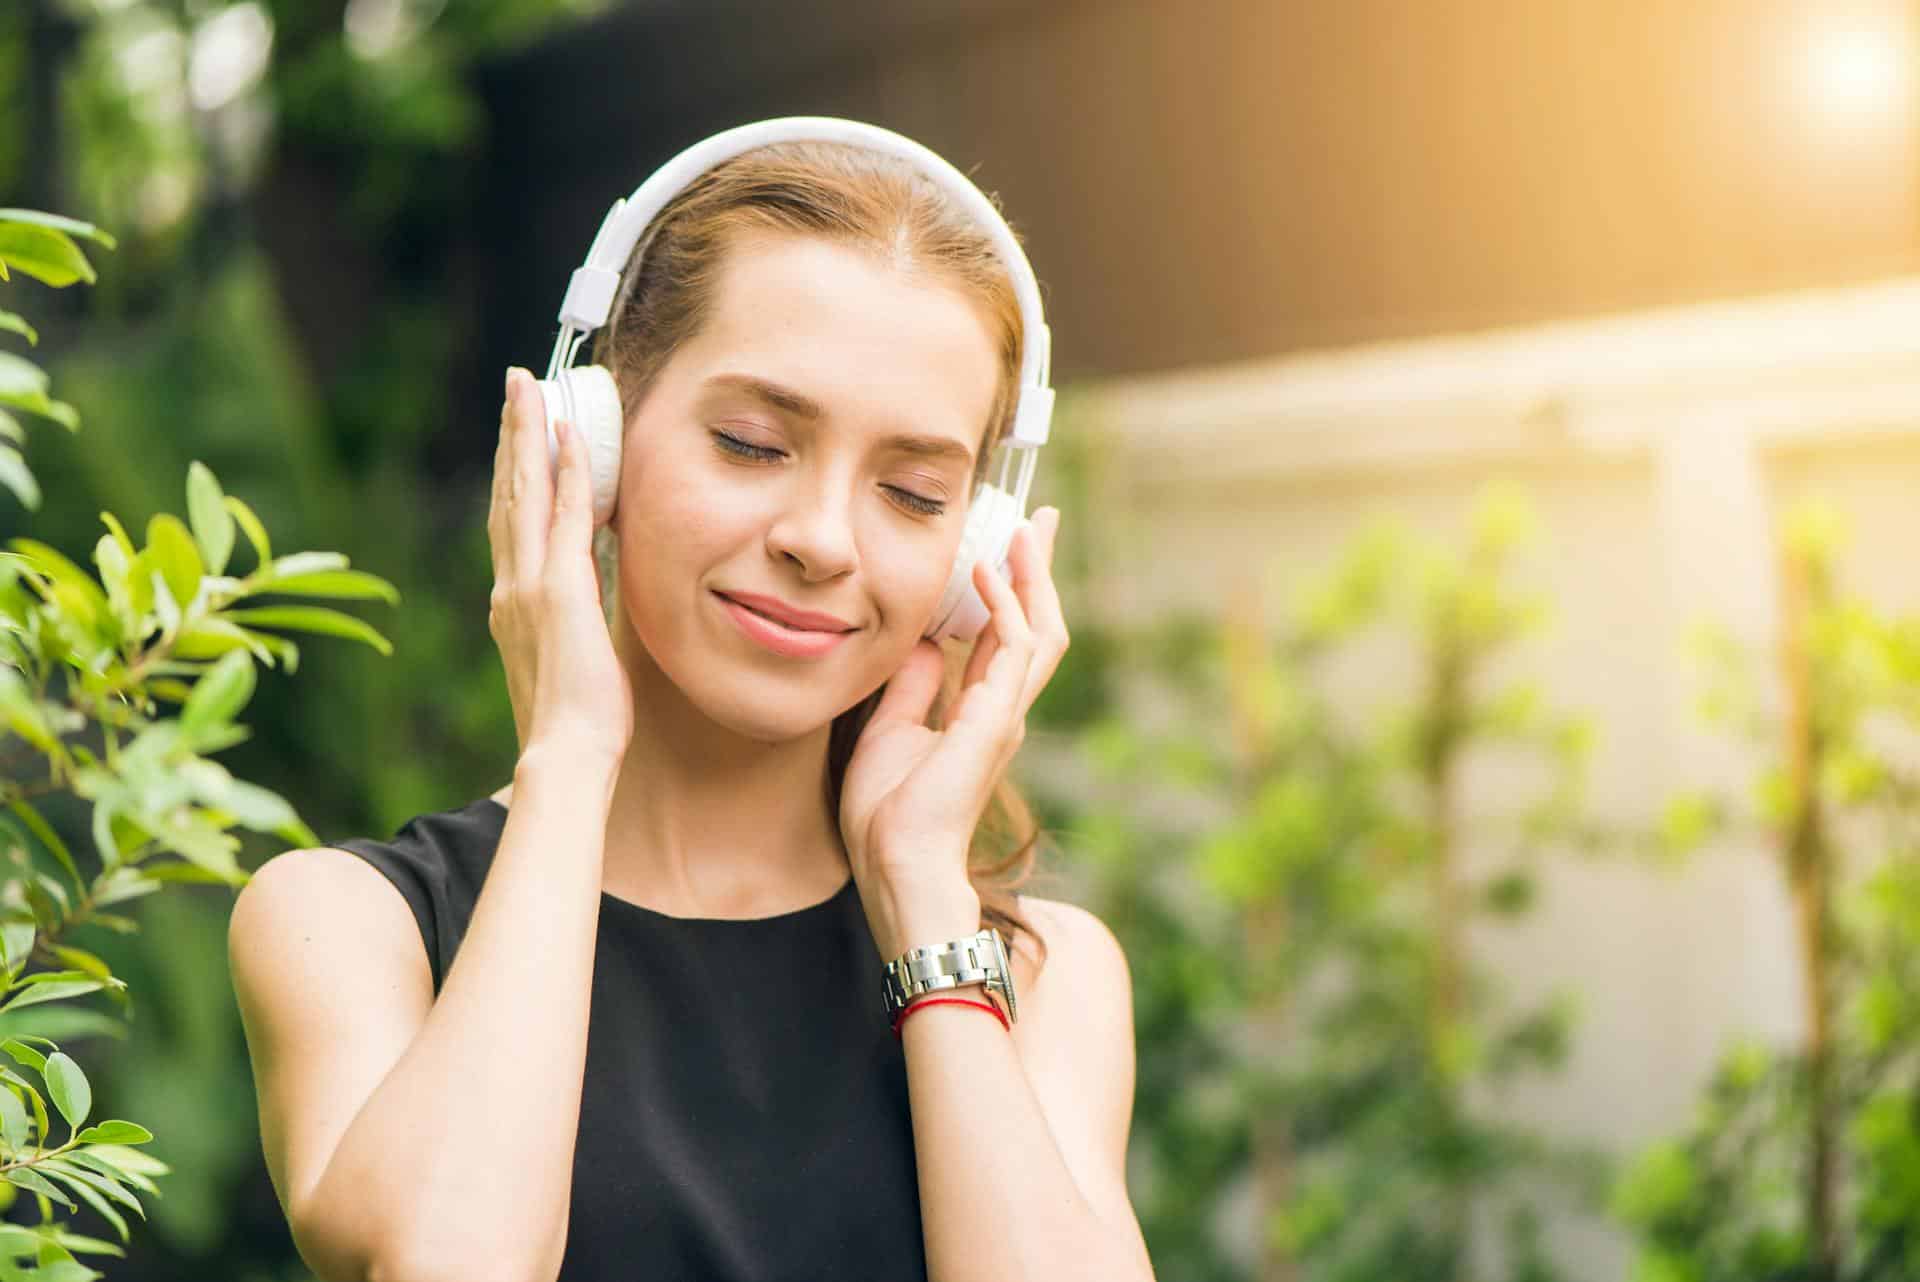 Woman listening to music with a blissful expression surrounded by greenery